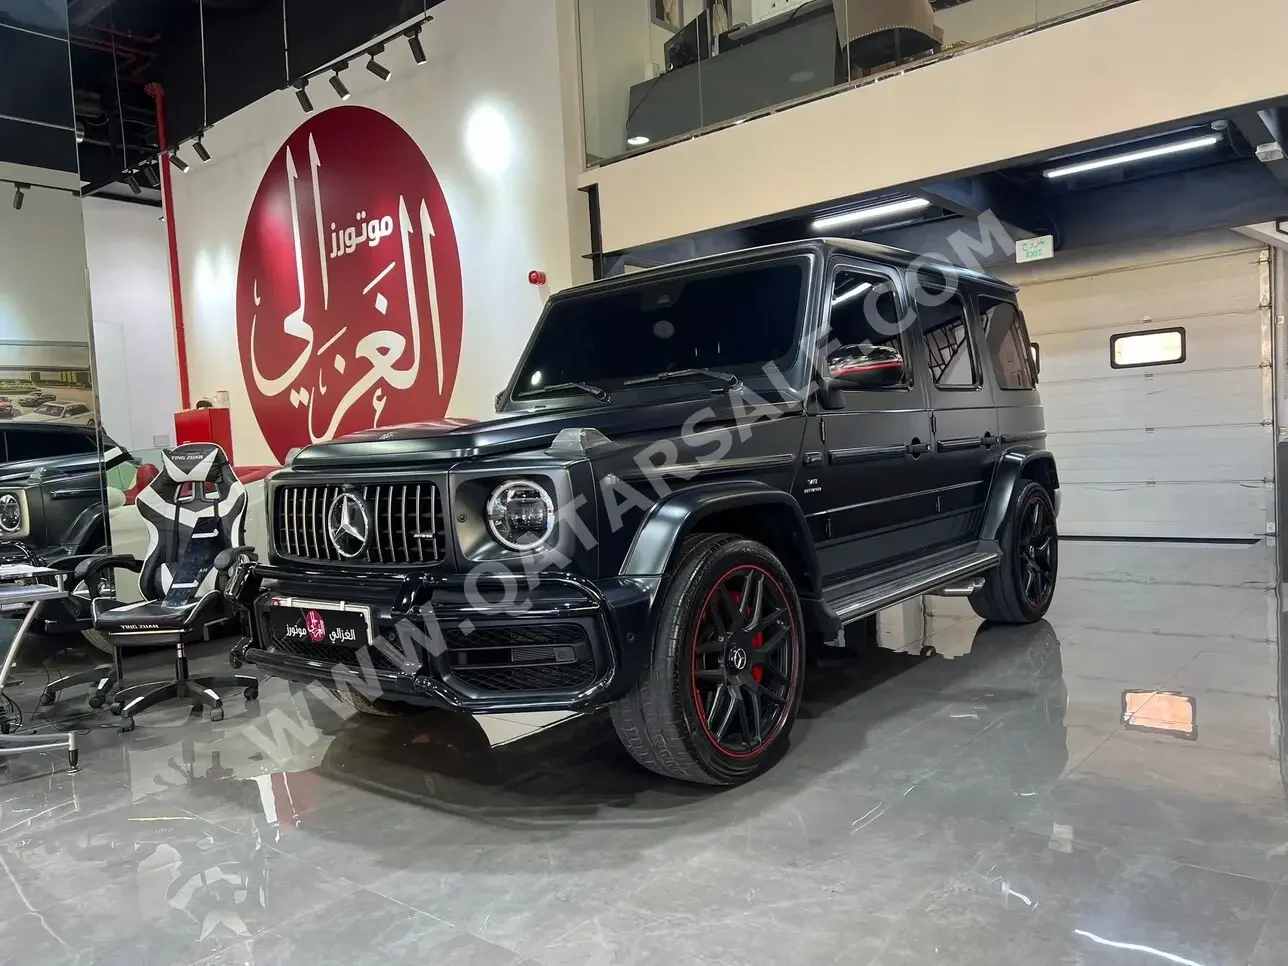 Mercedes-Benz  G-Class  63 AMG Edition 1  2019  Automatic  22,000 Km  8 Cylinder  Four Wheel Drive (4WD)  SUV  Black